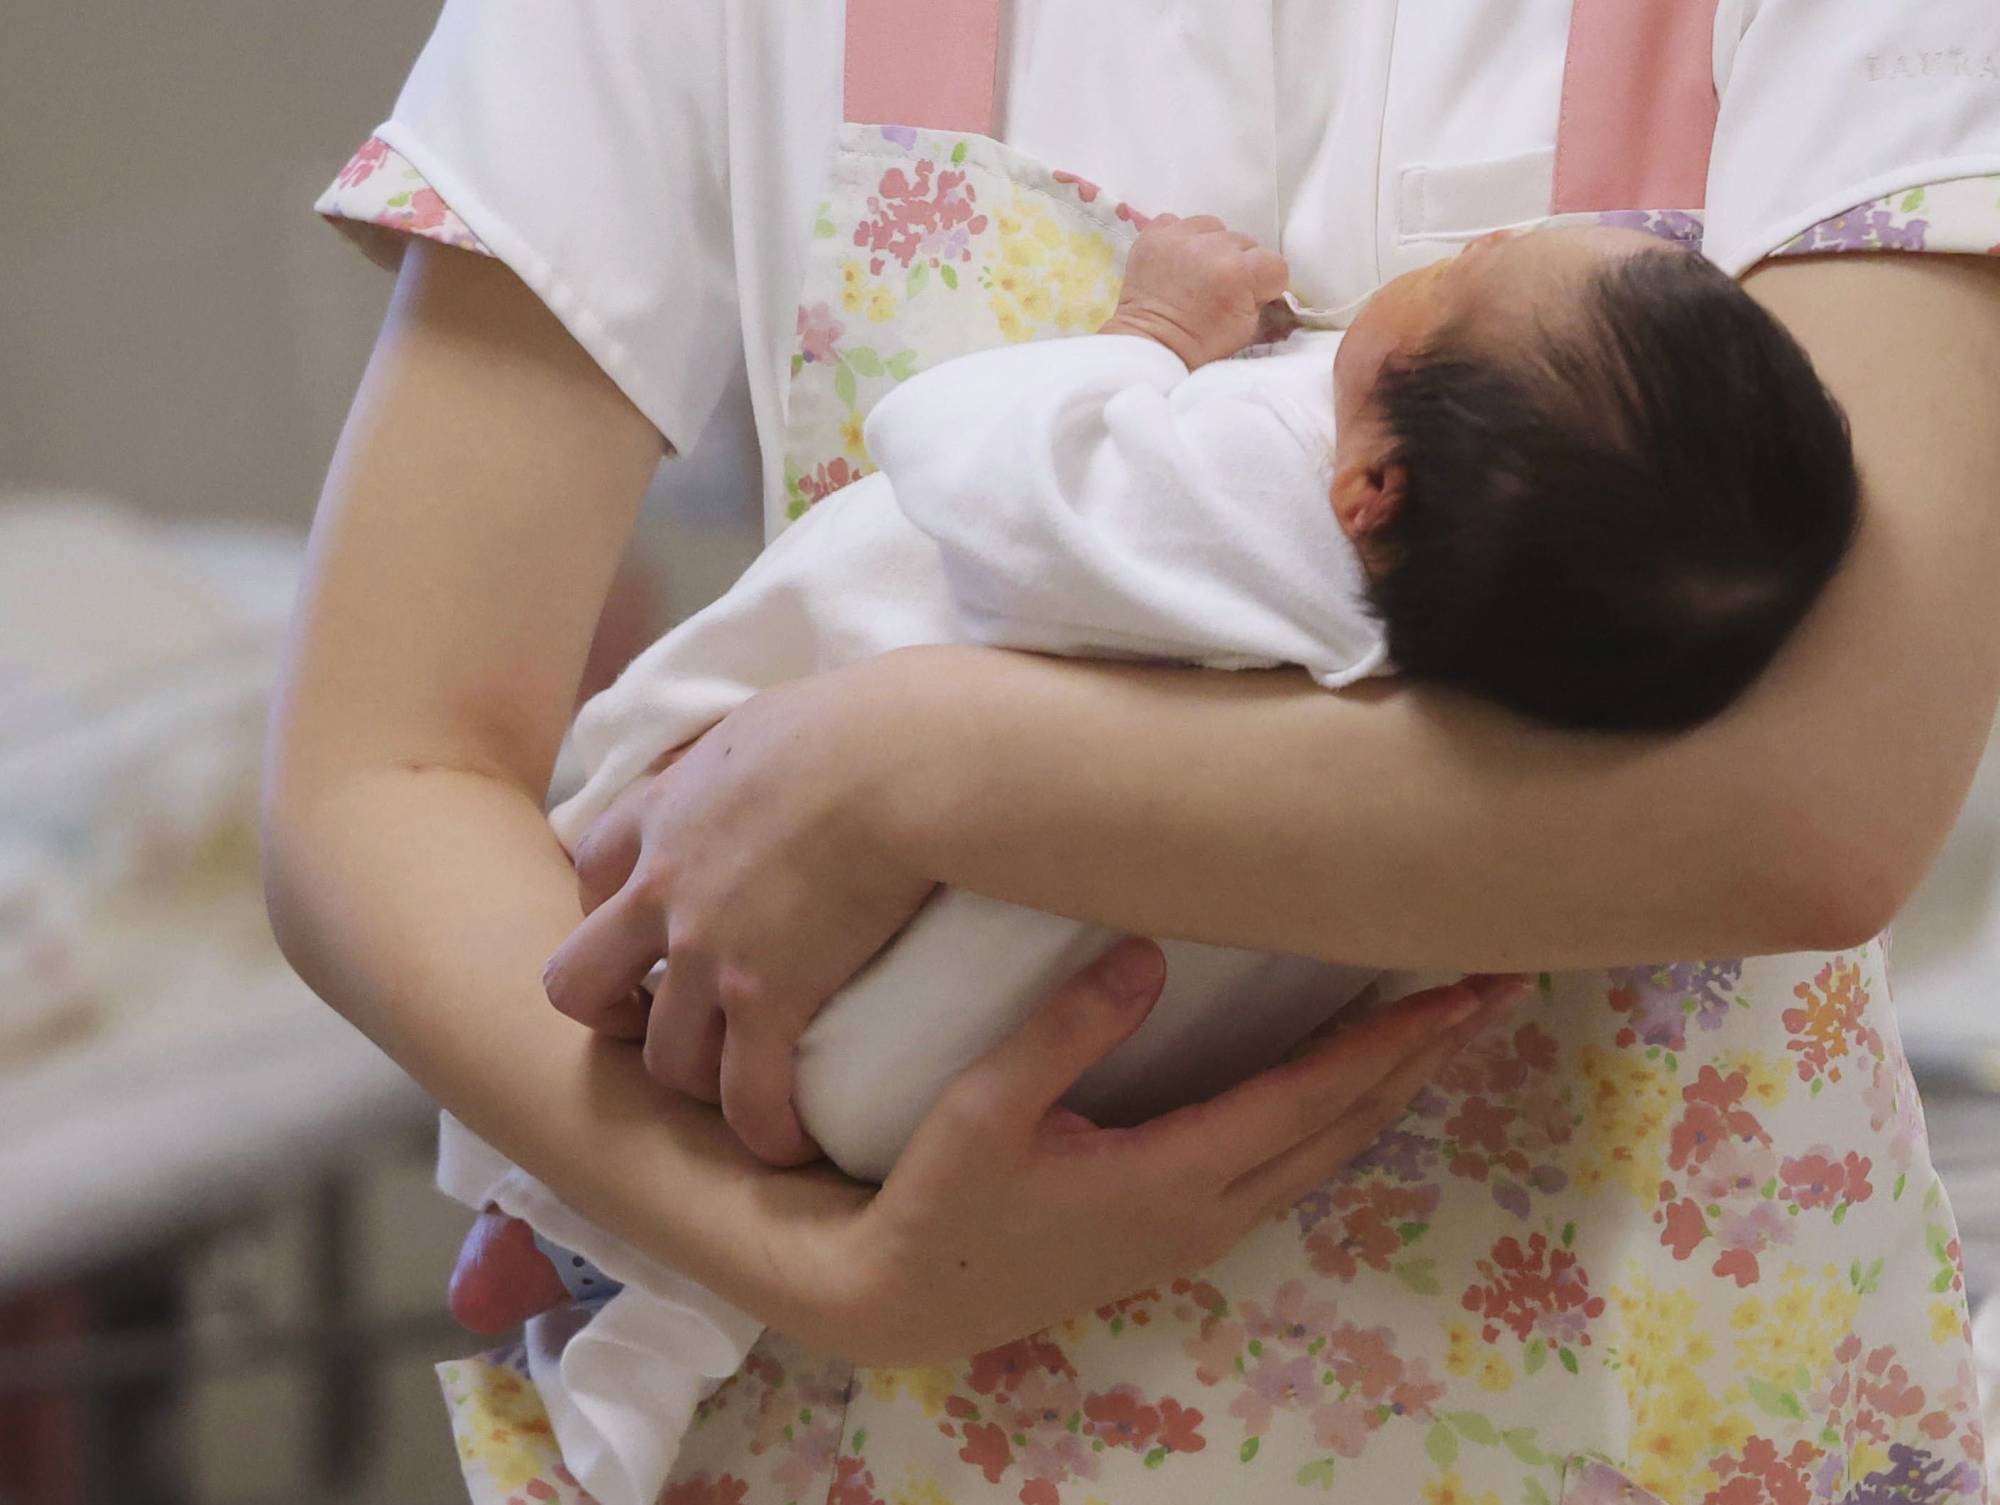 A recent survey found more than half of Japanese municipalities set conditions for residents to use postpartum care services, such as having physical or mental illnesses. | KYODO